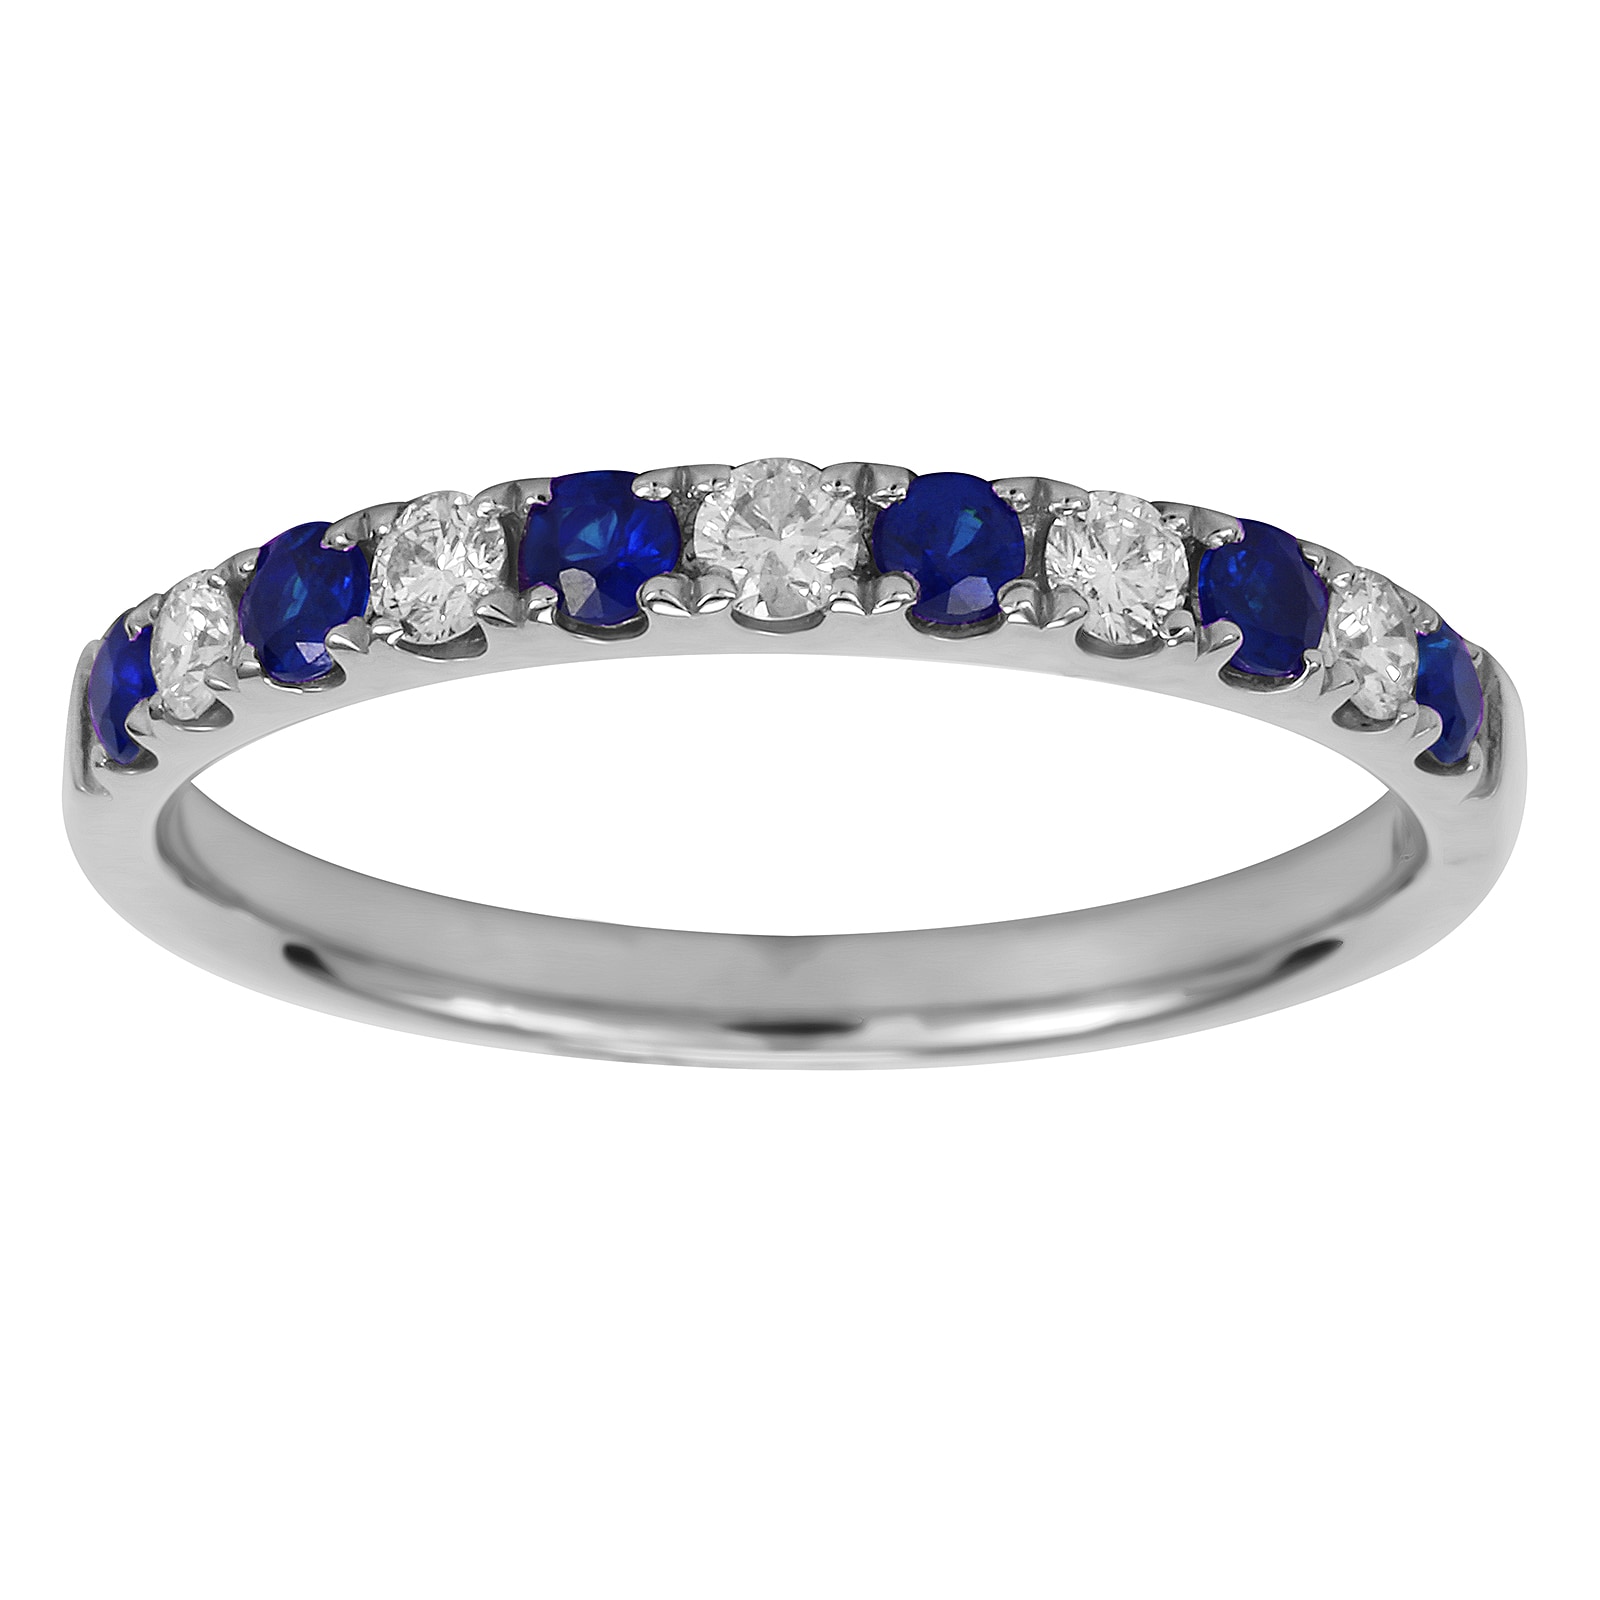 18ct White Gold 0.20ct Diamond & Sapphire Eternity Rings - Ring Size O